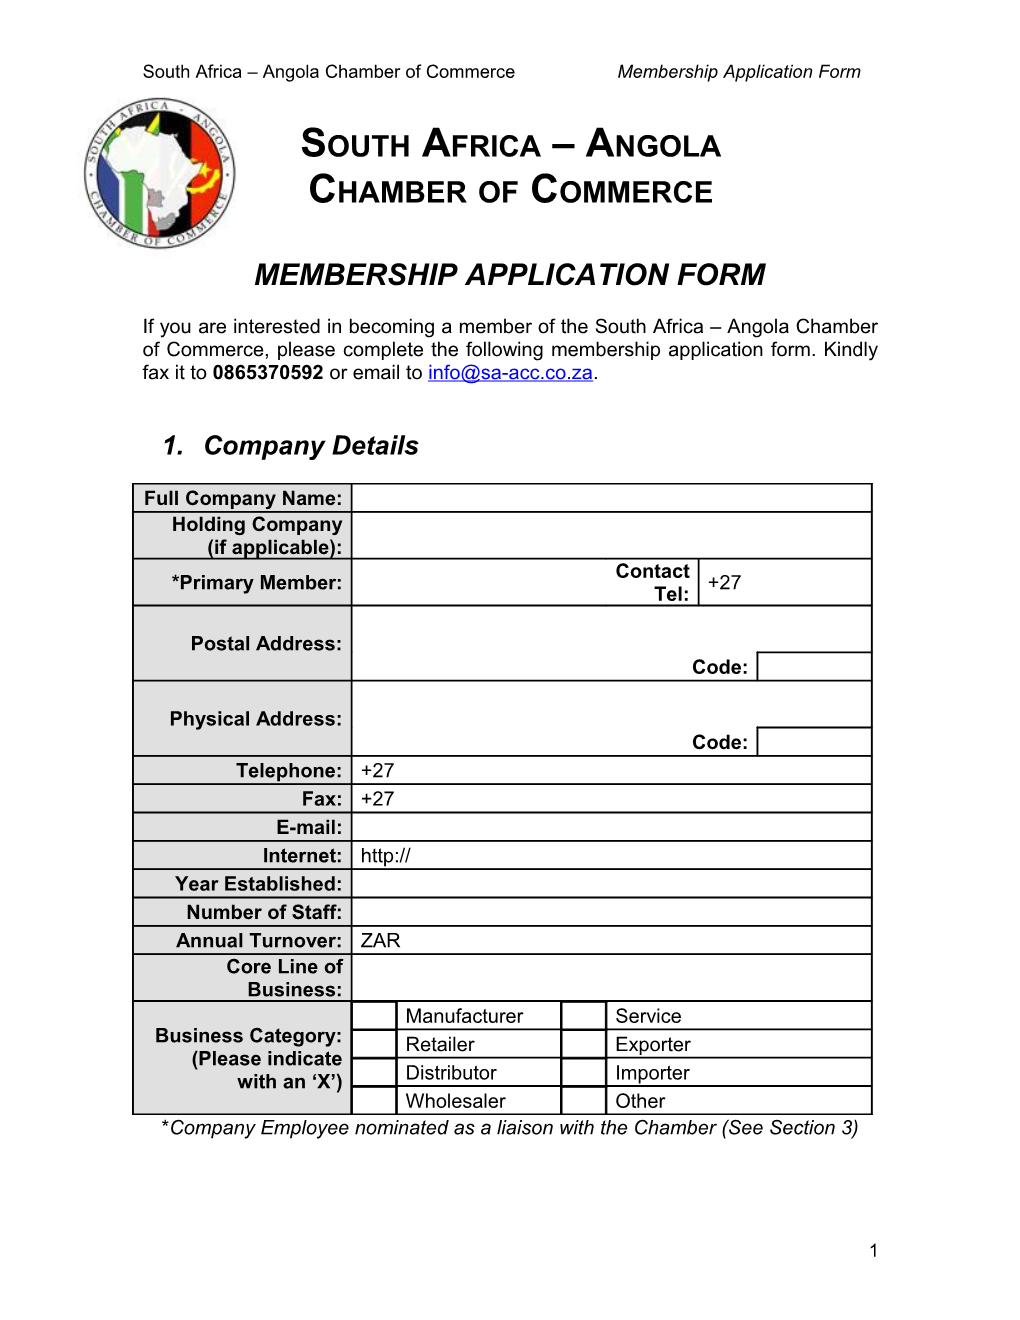 South Africa Angola Chamber of Commercemembership Application Form